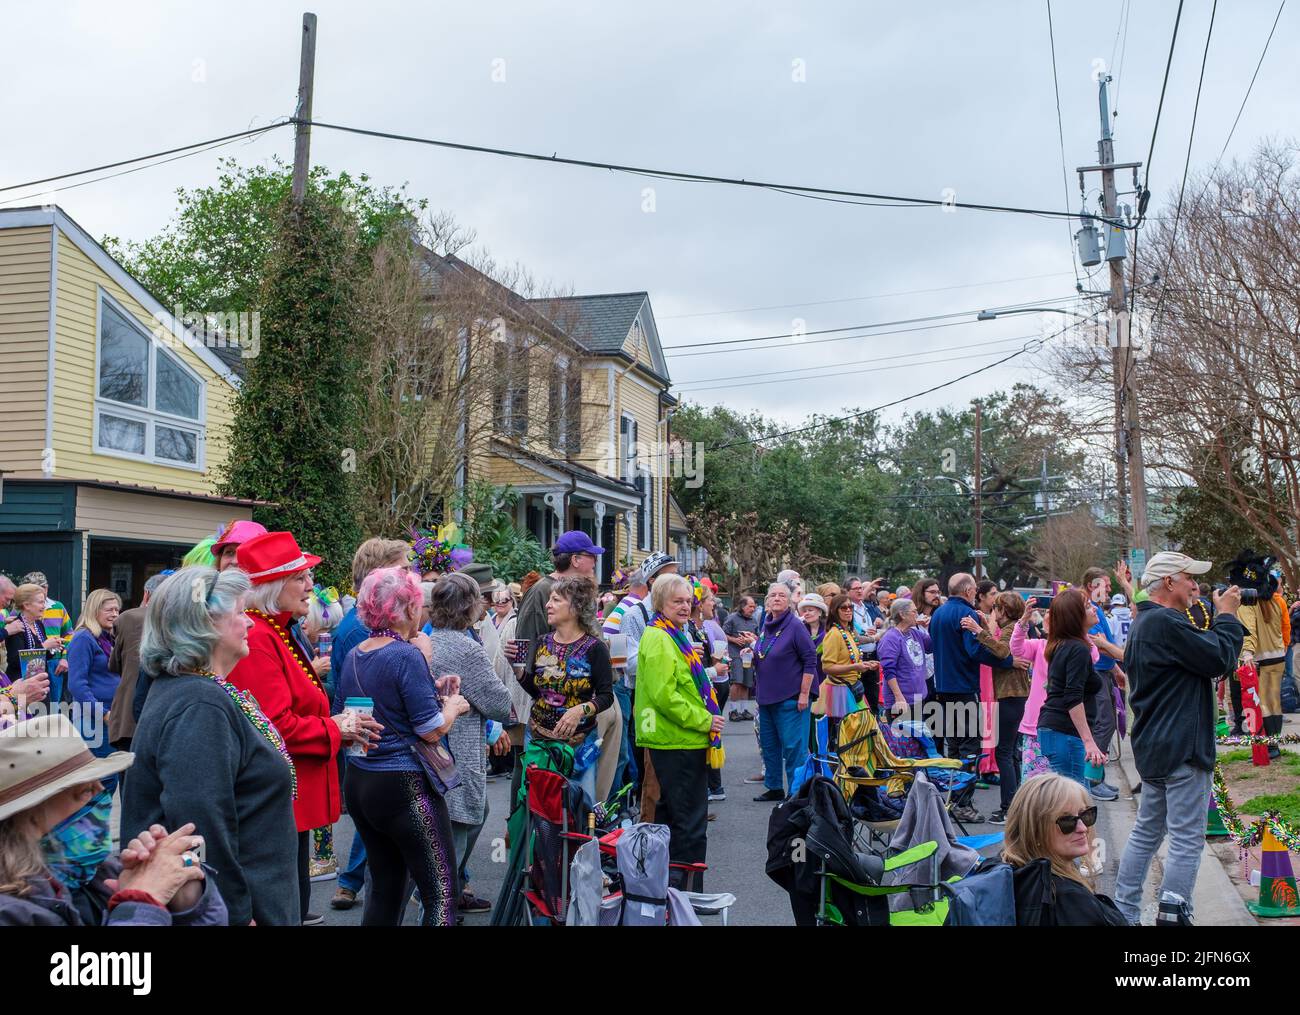 NEW ORLEANS, LA, USA - FEBRUARY 29, 2022: Crowd enjoying the music at Mardi Gras block party on the streets of Uptown neighborhood Stock Photo